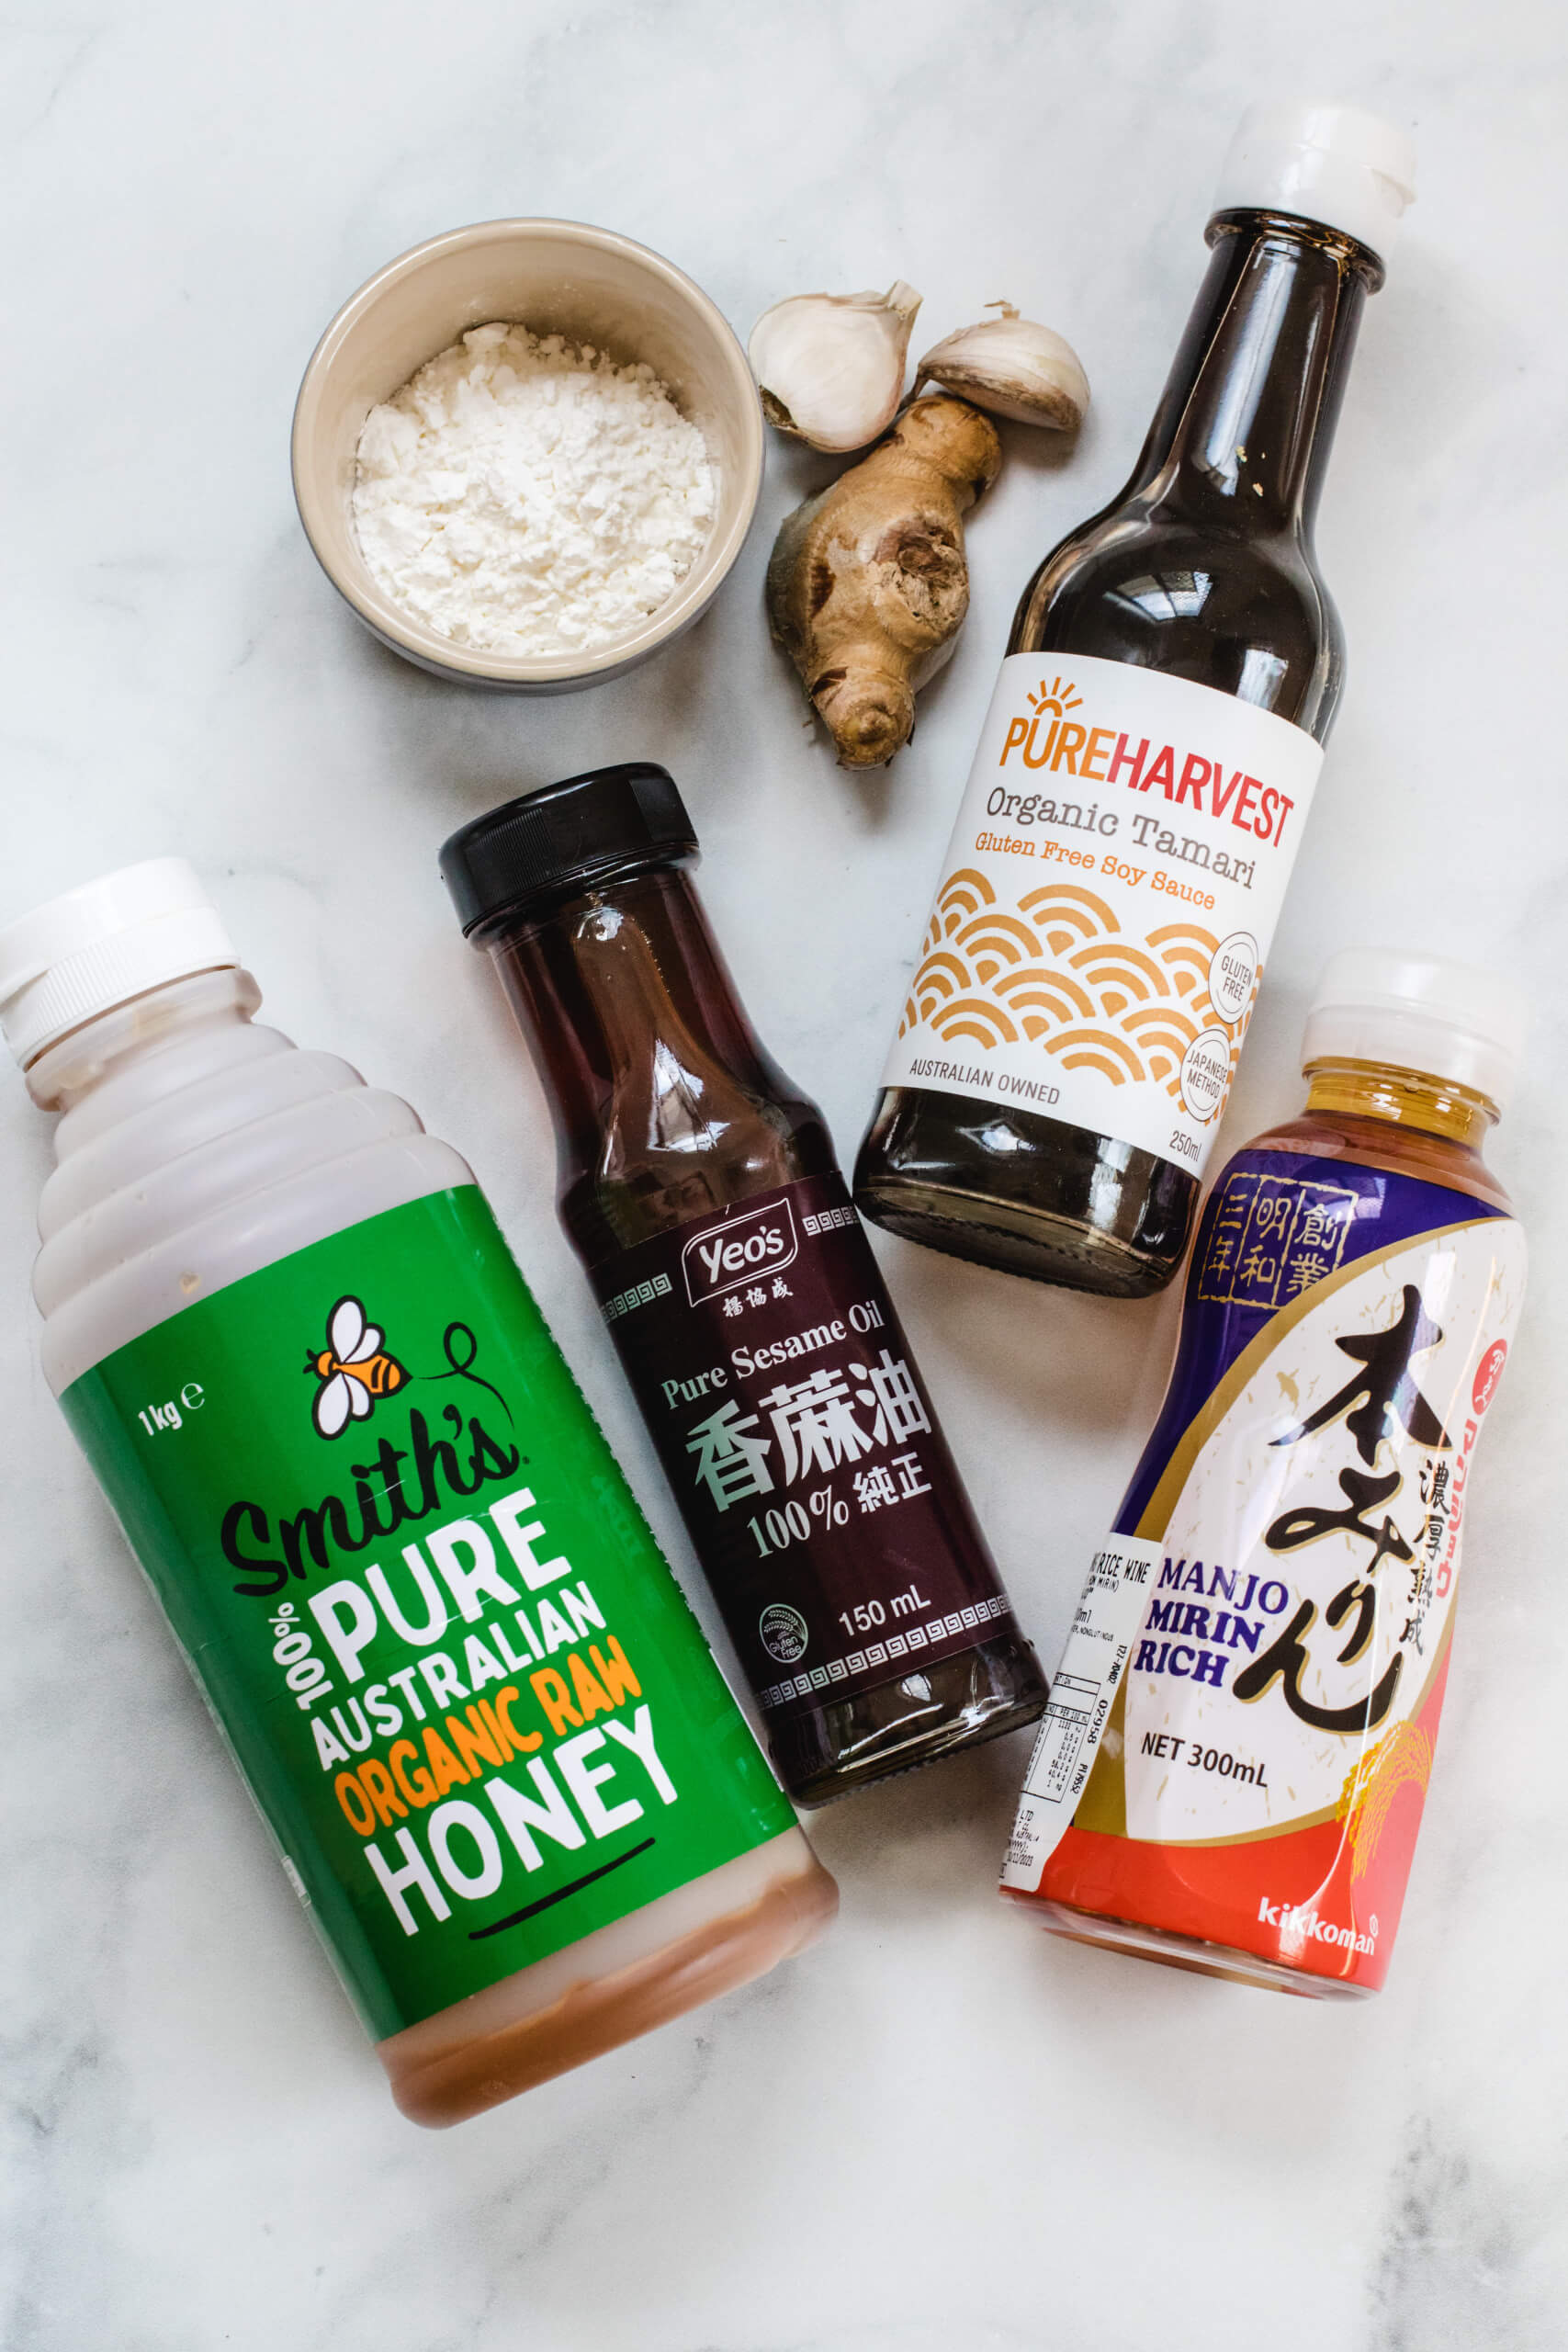 All the ingredients for the honey teriyaki sauce